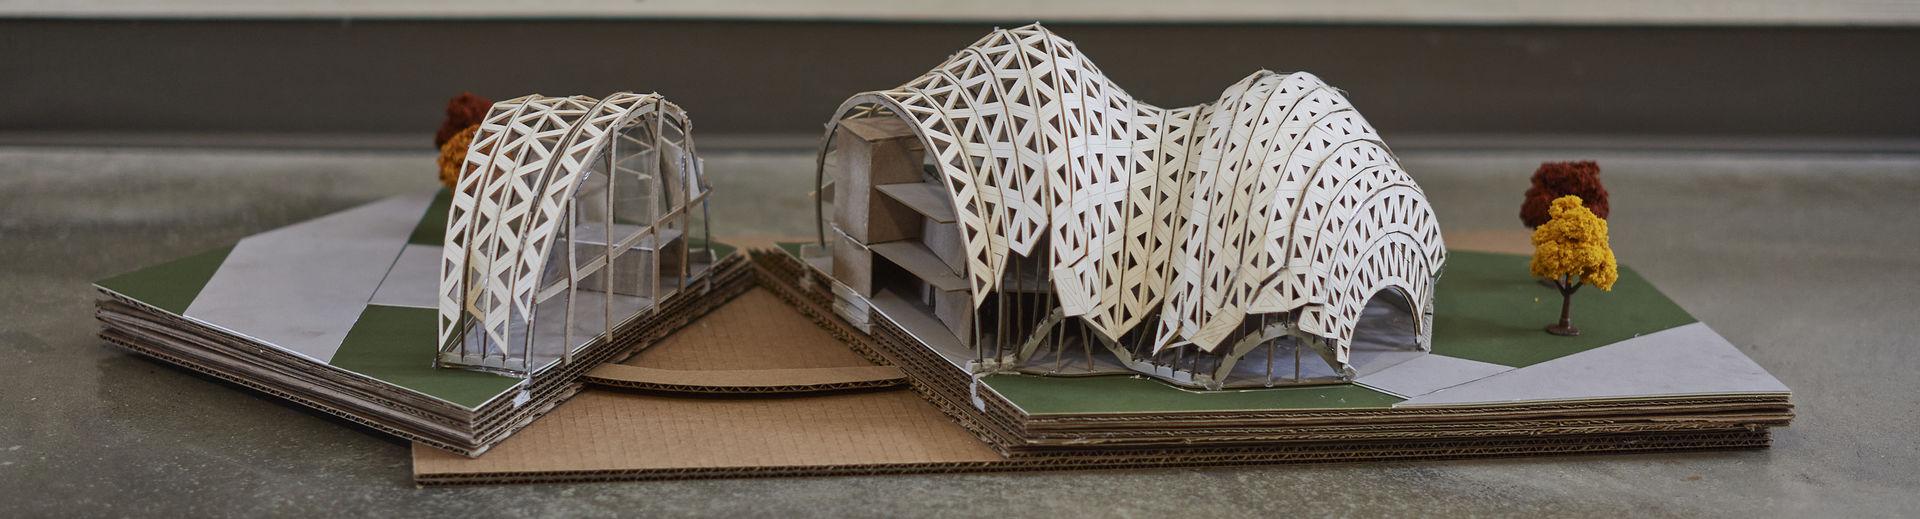 An architectural model of a structure with a curved roof is shown.